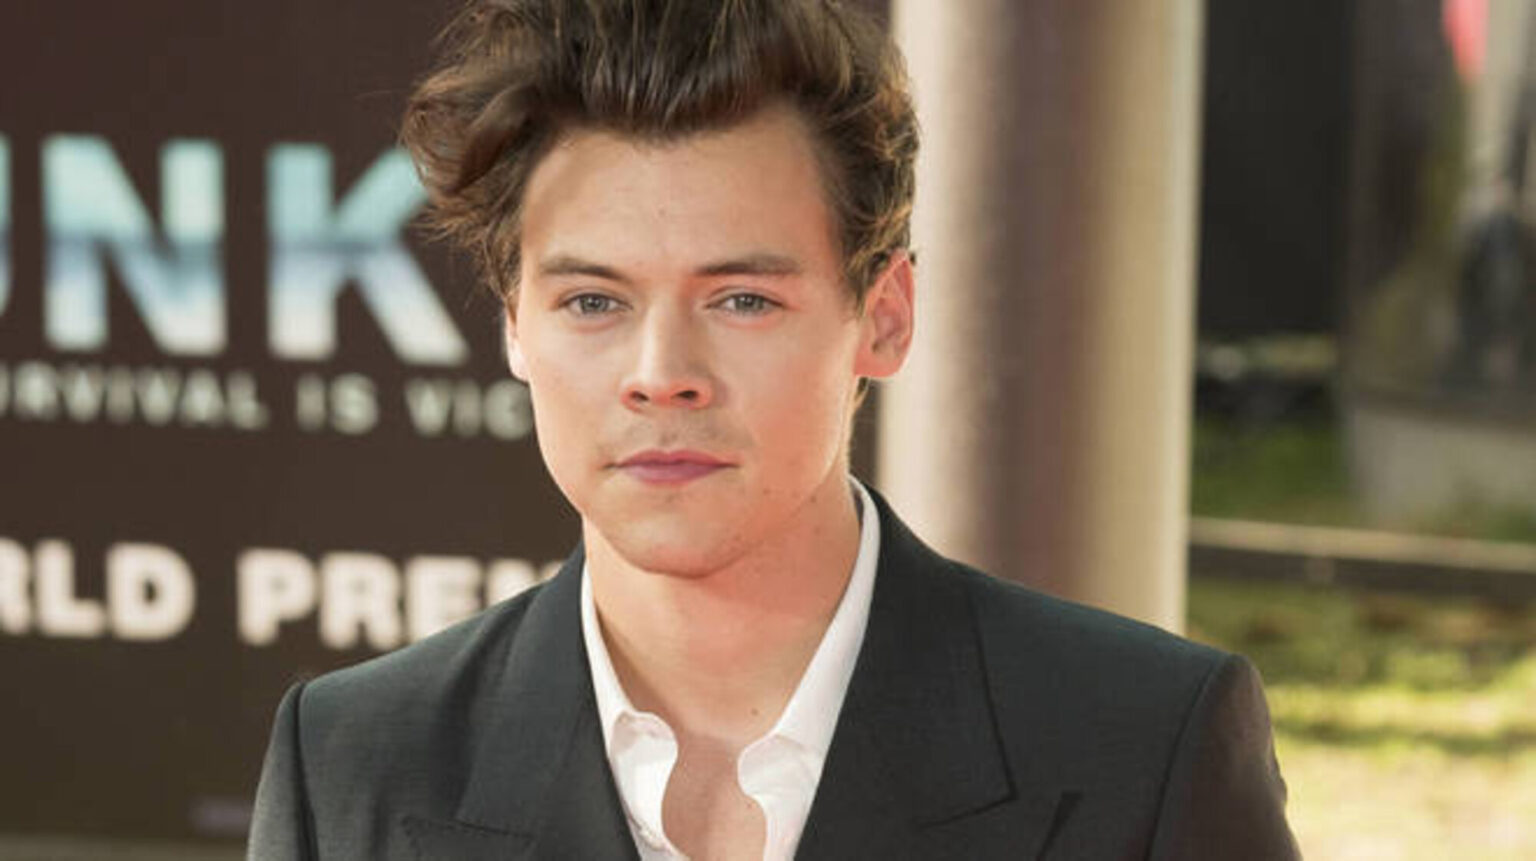 We really can't wait any longer. Check out all the exciting behind the scenes shots of Harry Styles with his co-stars on set for his upcoming movie here.